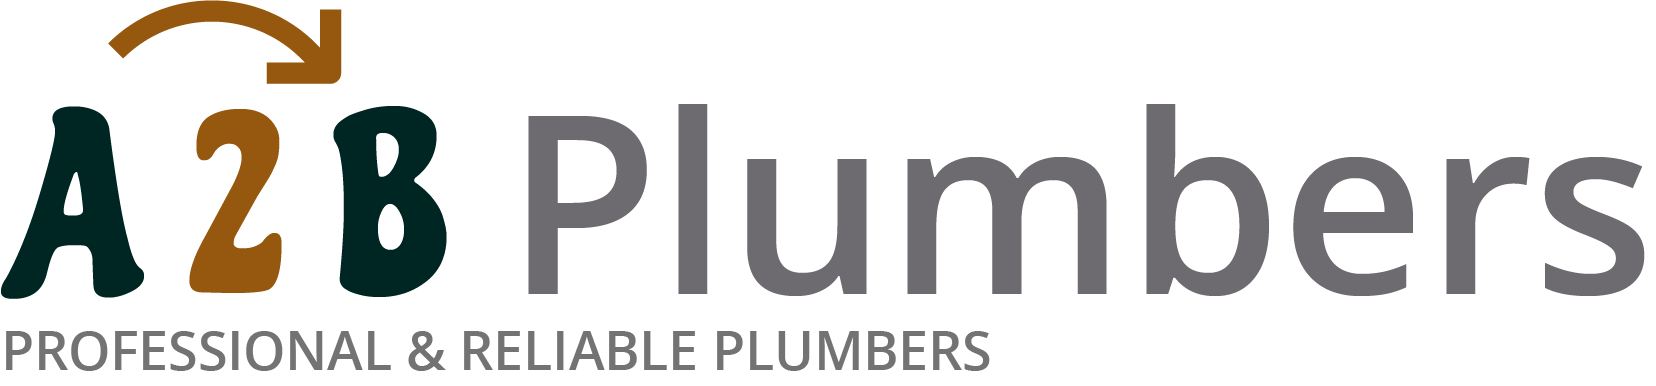 If you need a boiler installed, a radiator repaired or a leaking tap fixed, call us now - we provide services for properties in Ruislip and the local area.